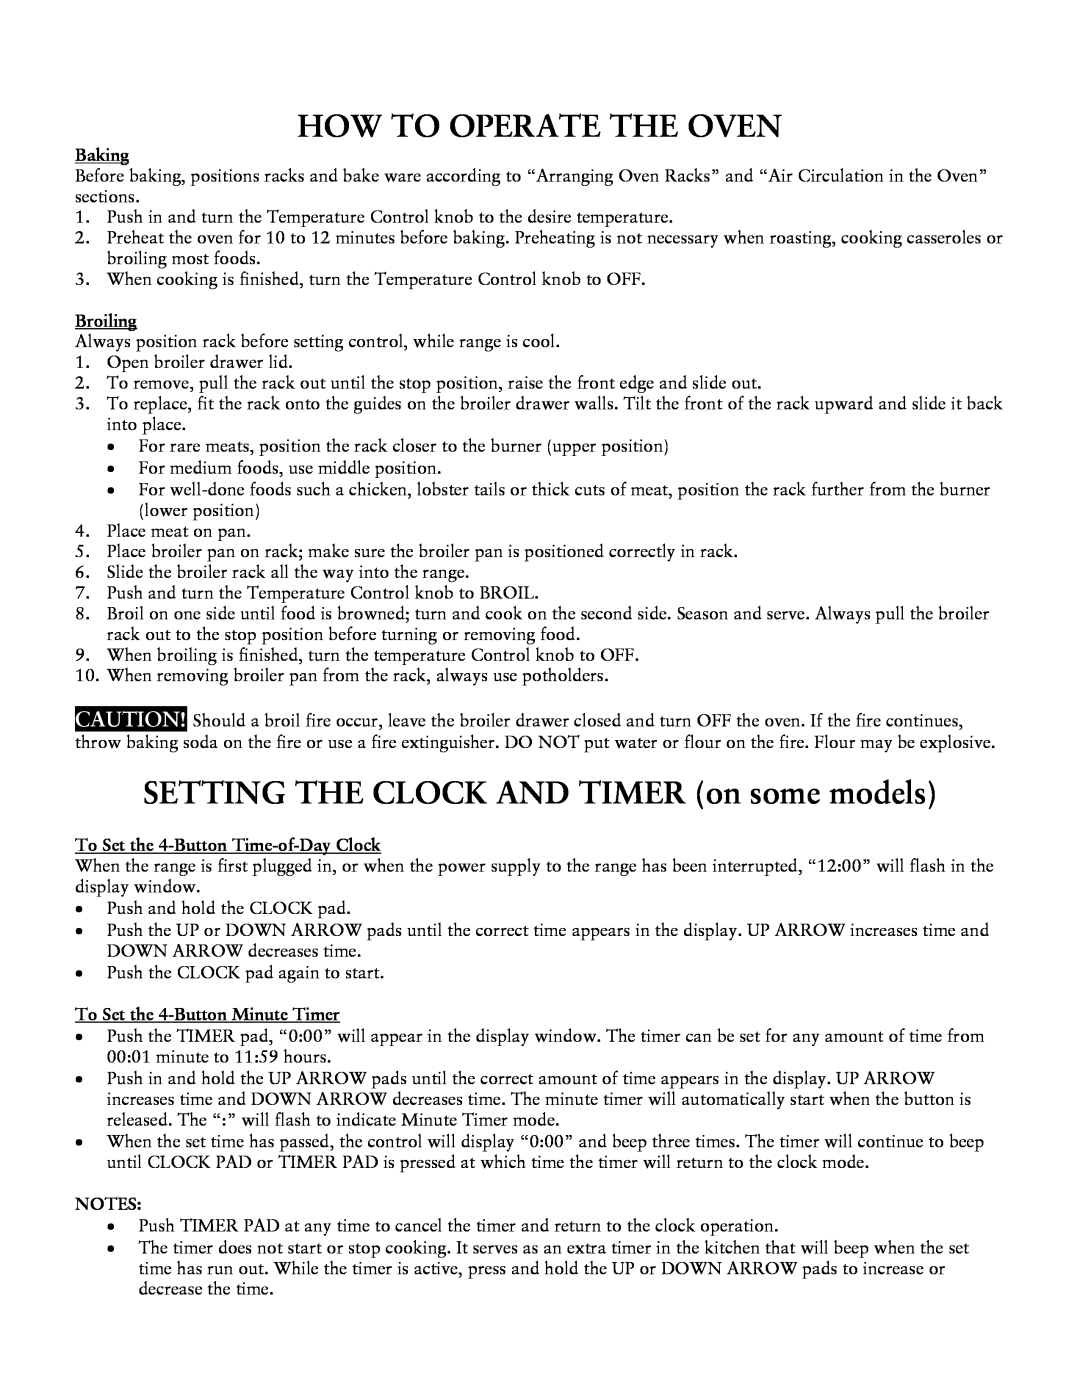 Jarden consumer Solutions Jarden consumer Solutions How To Operate The Oven, SETTING THE CLOCK AND TIMER on some models 